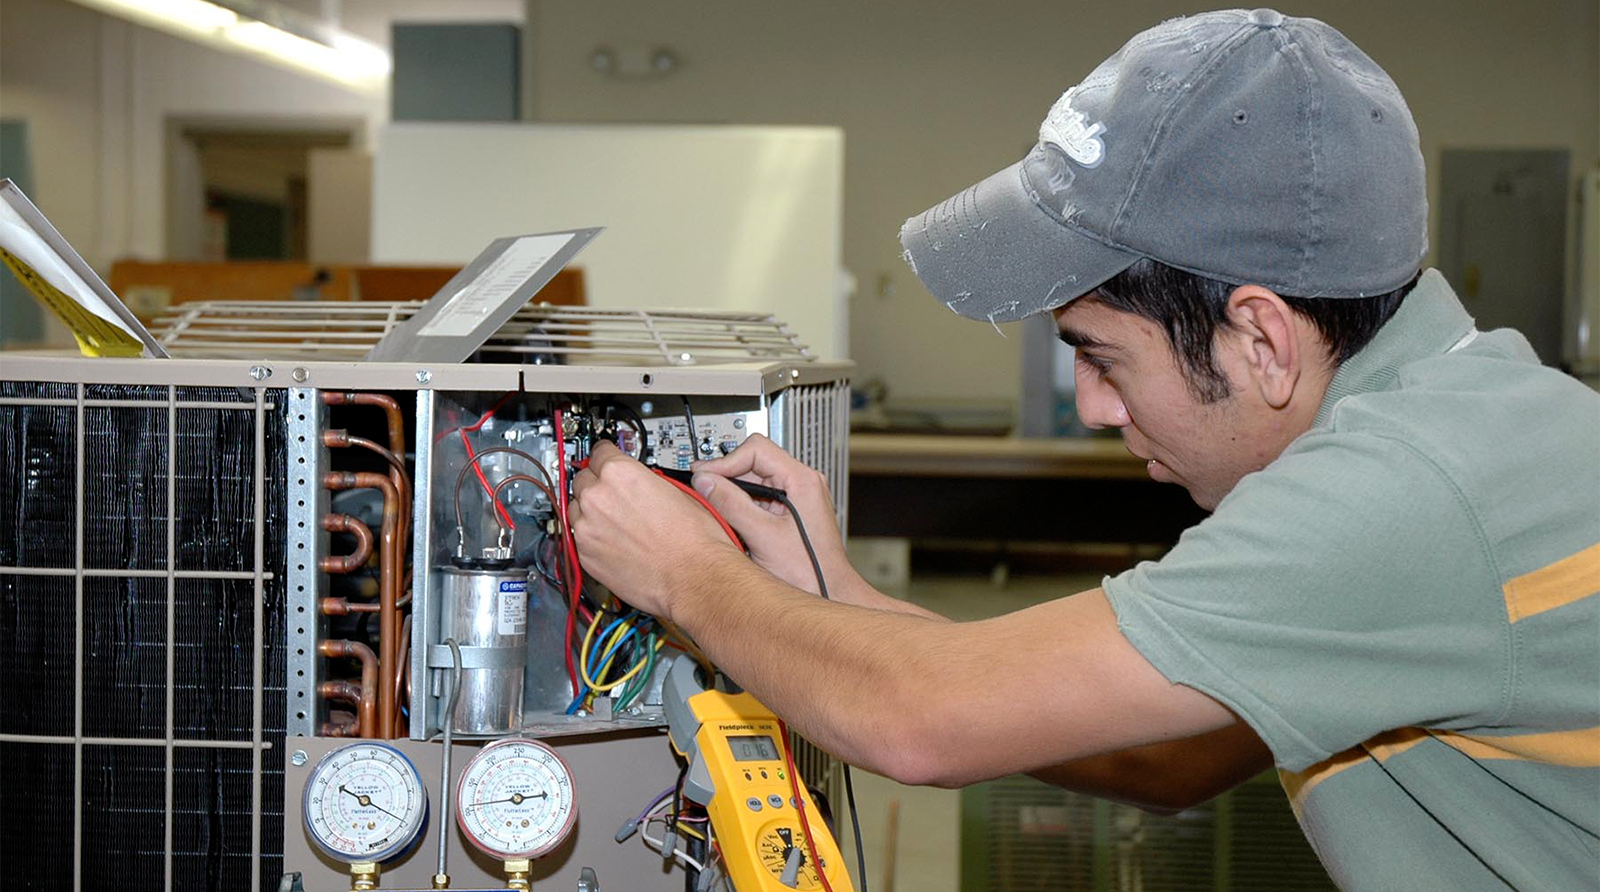 Student works on an AC unit